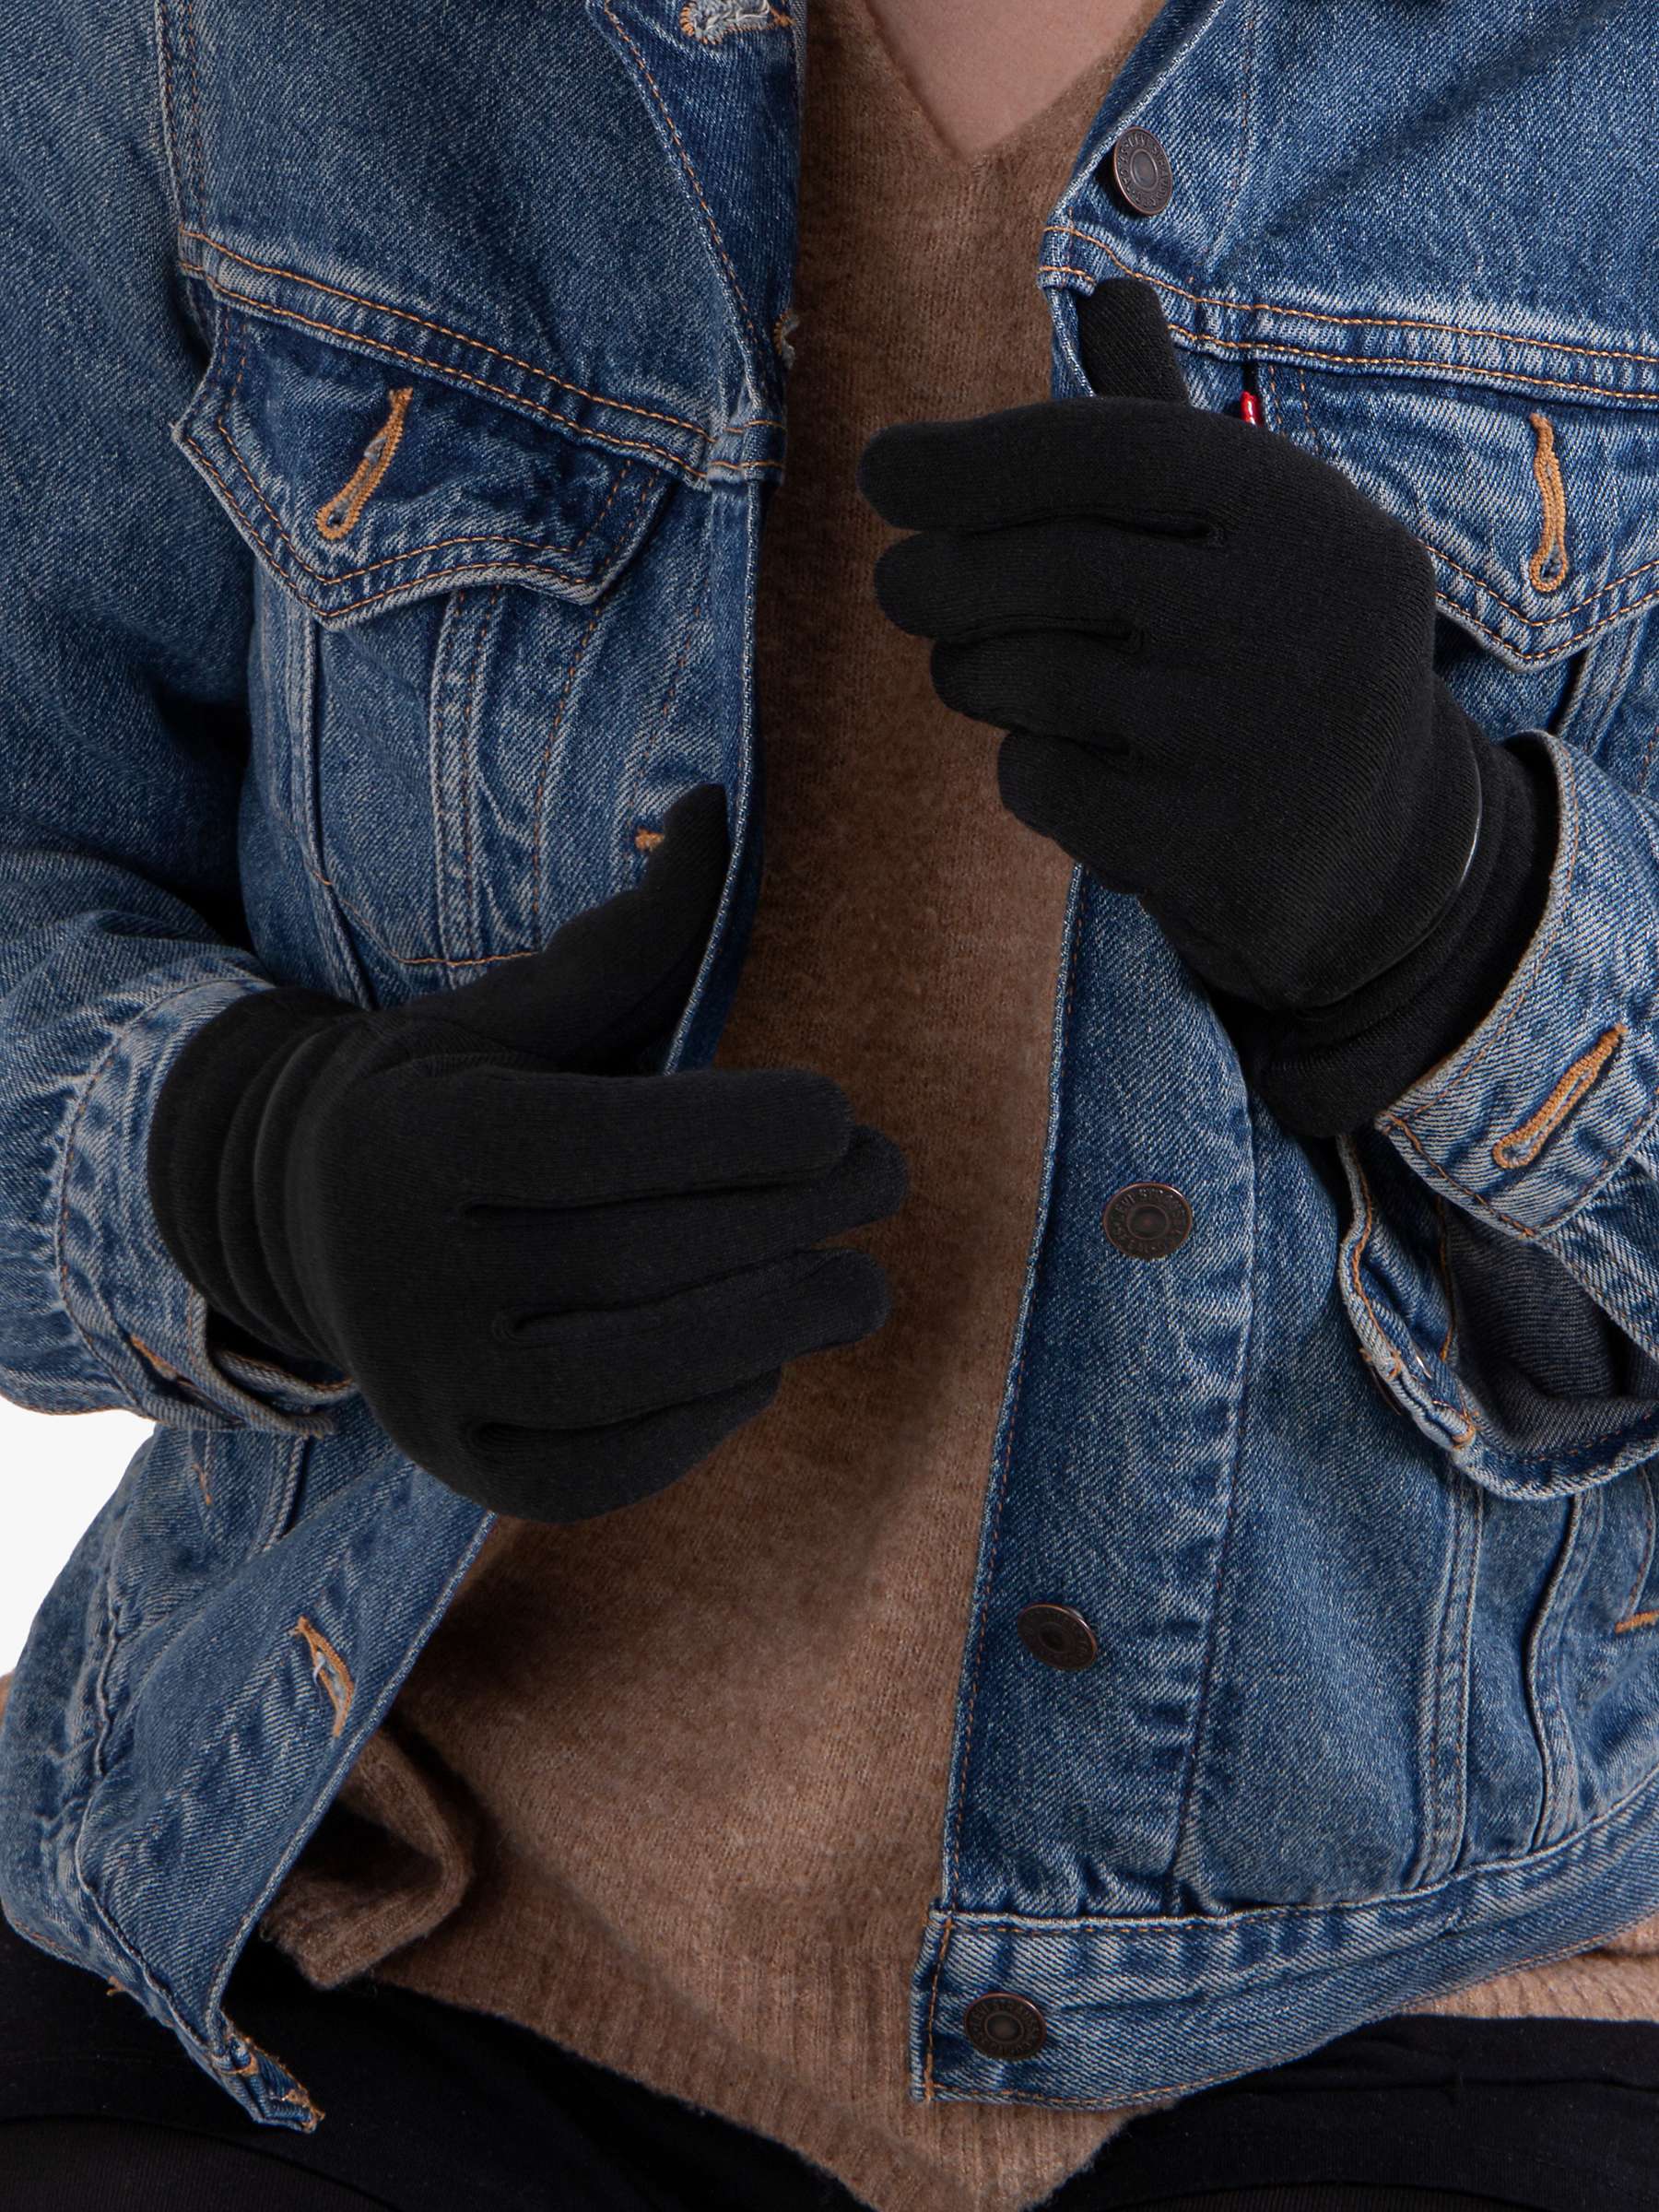 Buy totes Thermal Smartouch Piping Detail Gloves Online at johnlewis.com